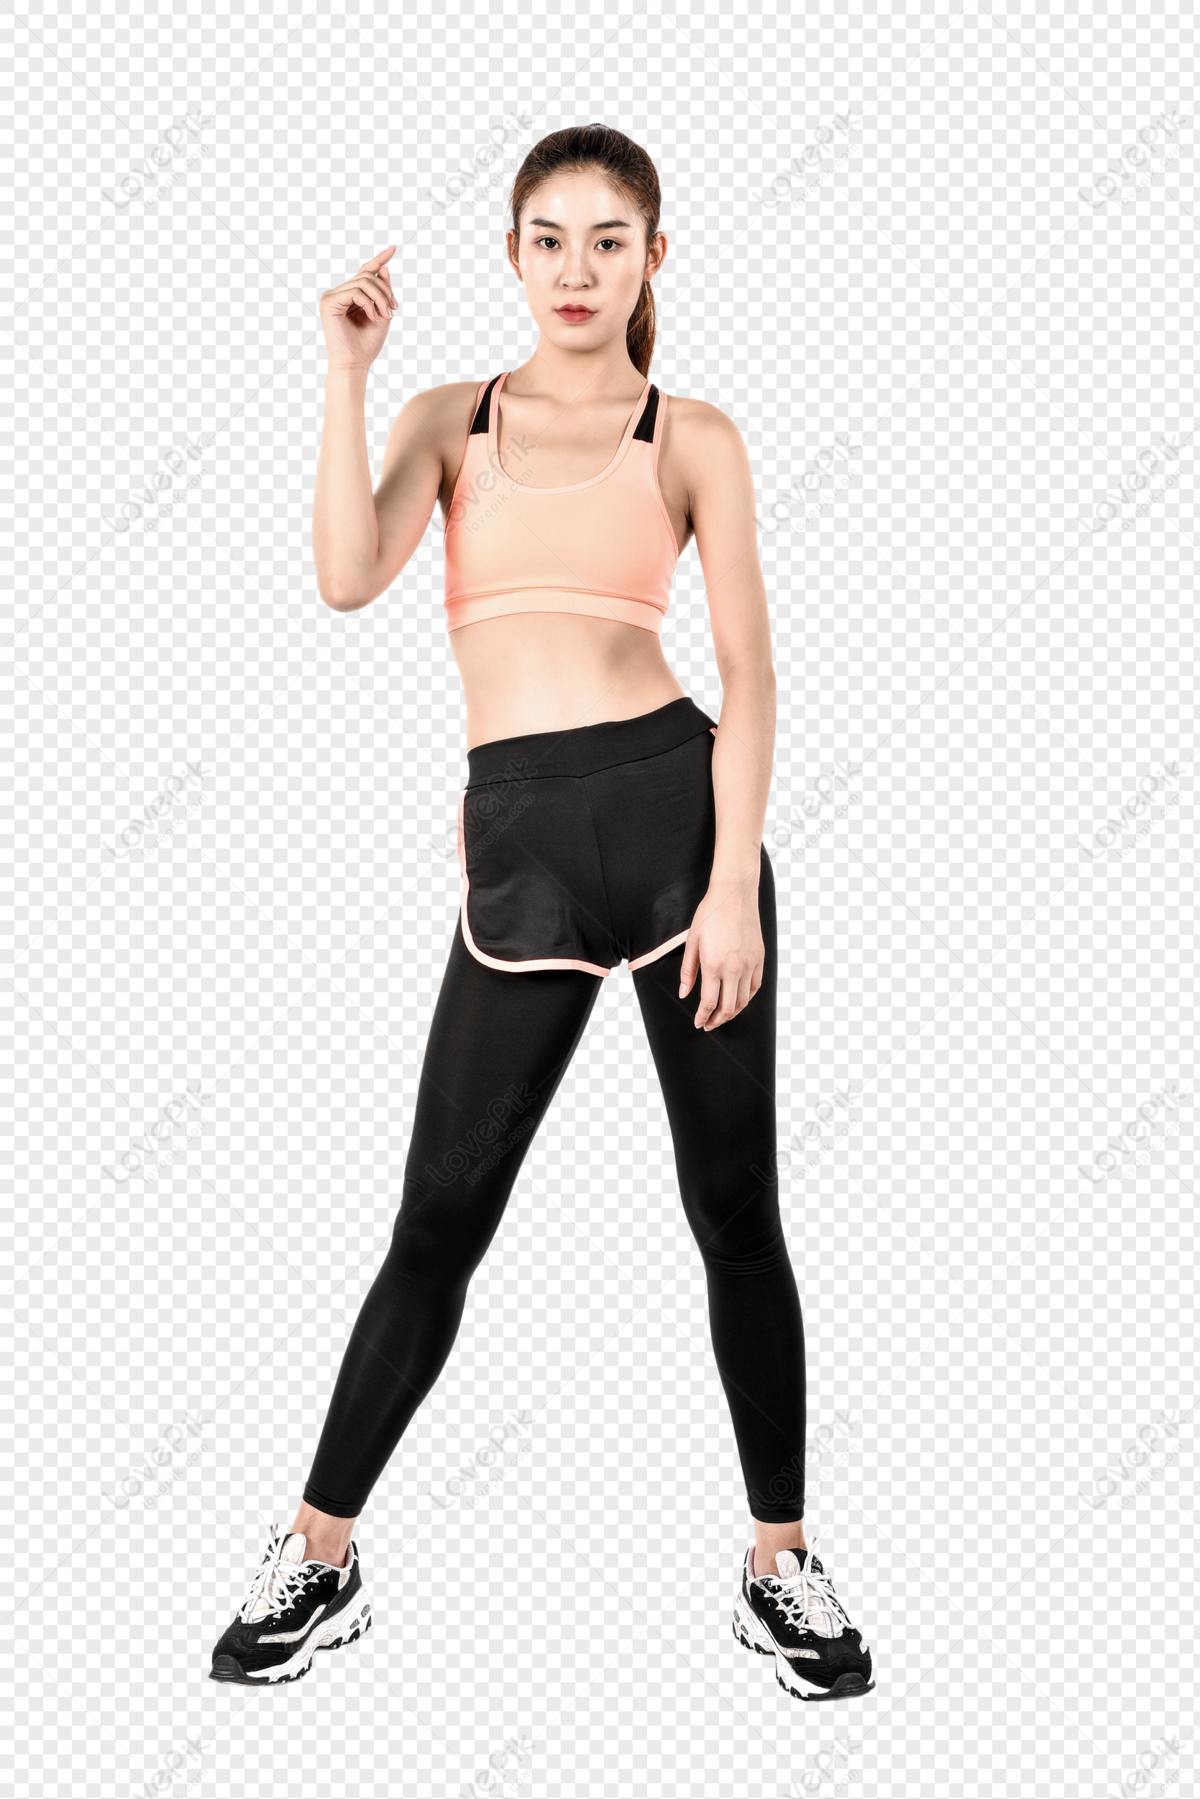 Man Sportswear PNG Images With Transparent Background